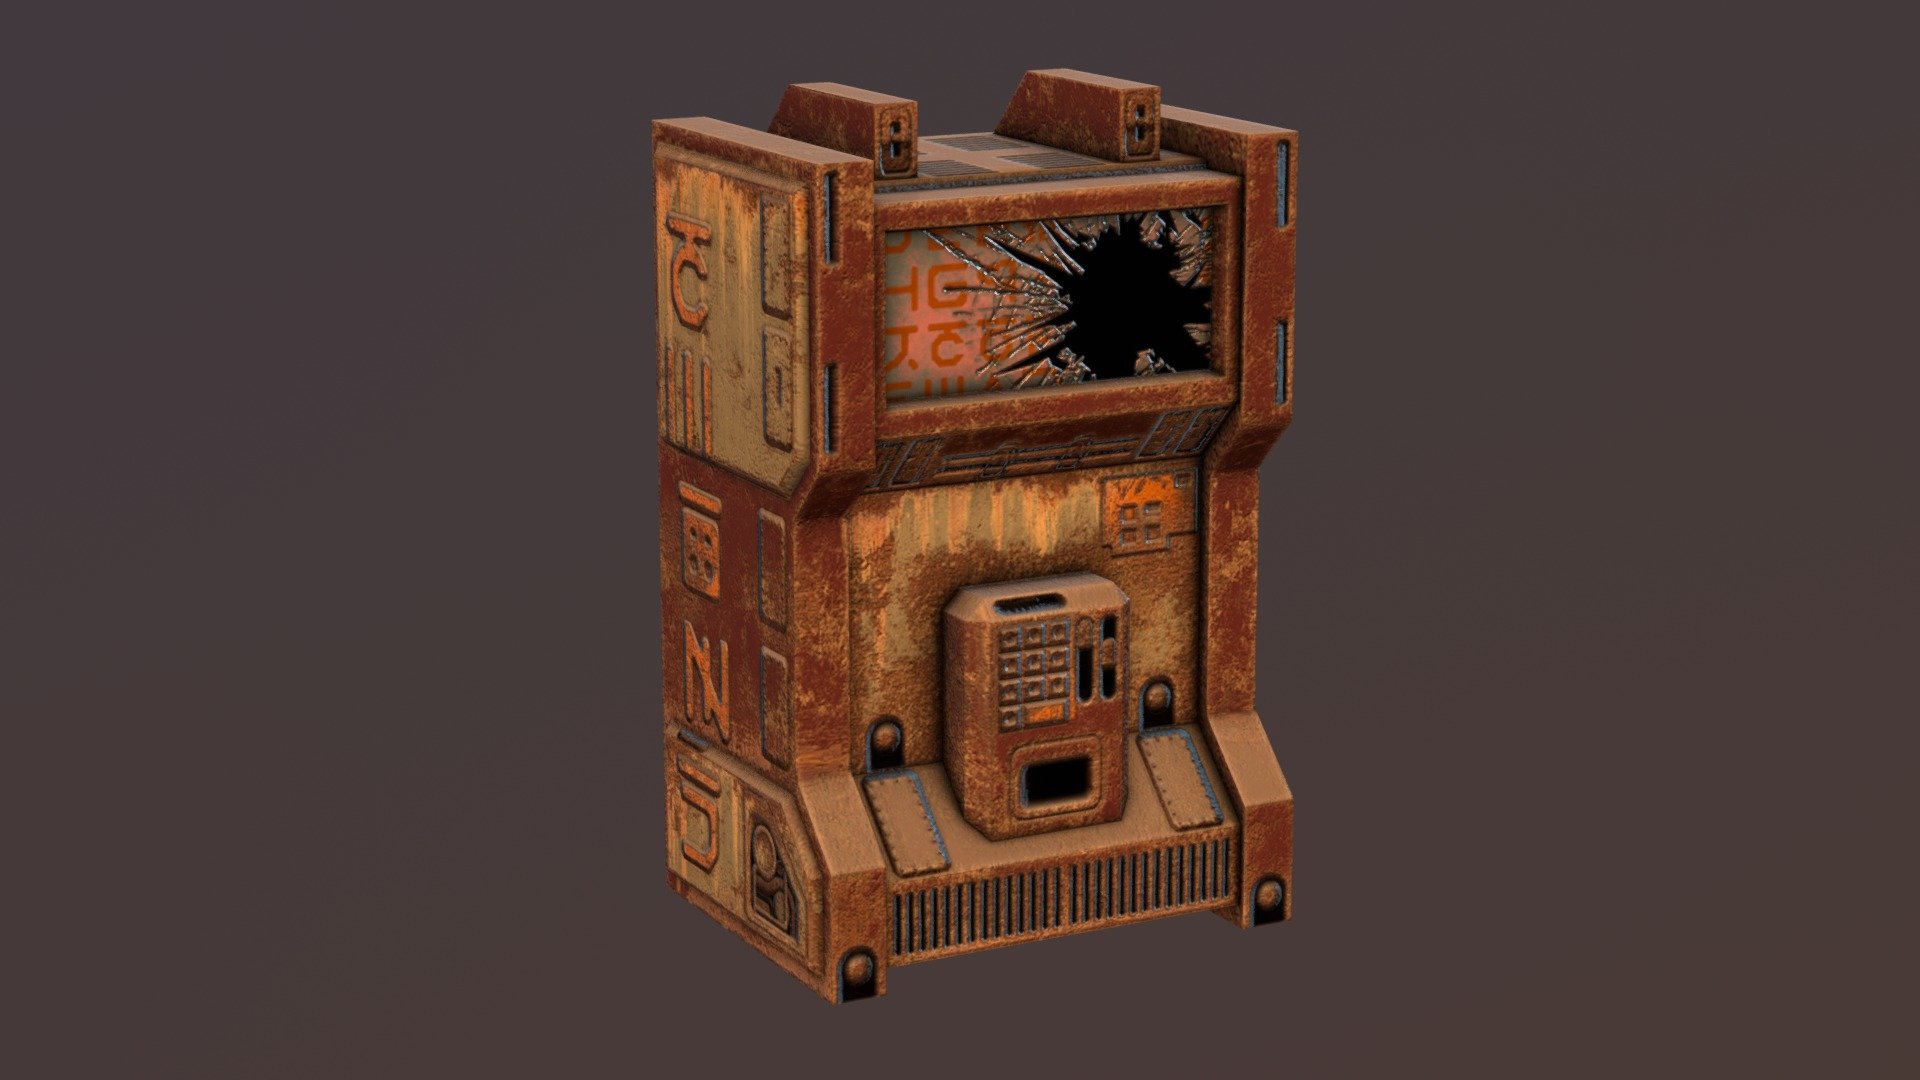 A ruined sci-fi vending machine for a UE4 scene I'm working on. Small props like this don't usually get posted, but I like how this one looks.



Made with 3DSMax and Substance Painter - Ruined Vending Machine - 3D model by Renafox (@kryik1023) 3d model